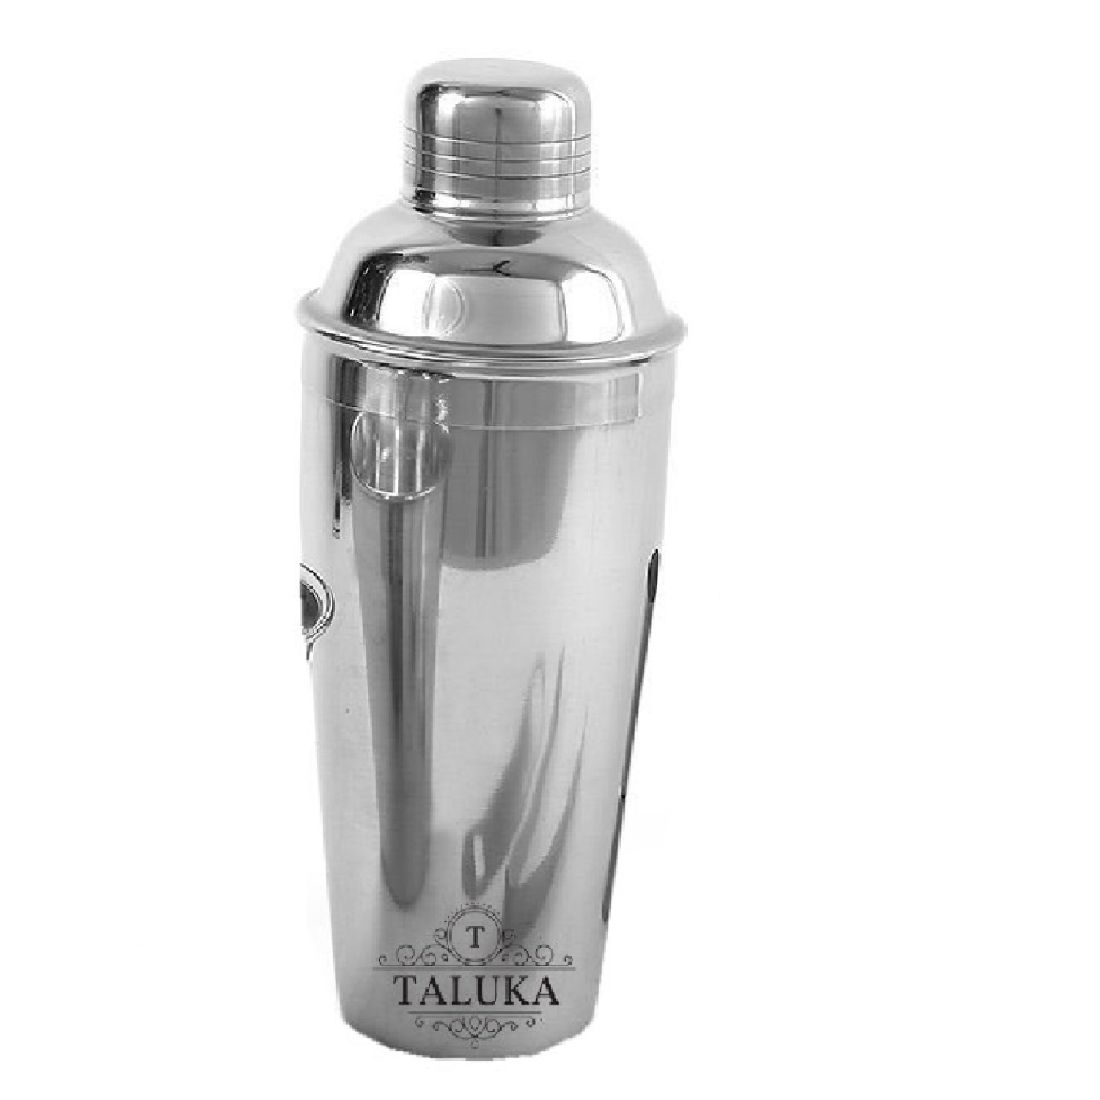 Stainless Steel Mocktail Juice Mixing & Serving Wine Cocktail Wine Shaker